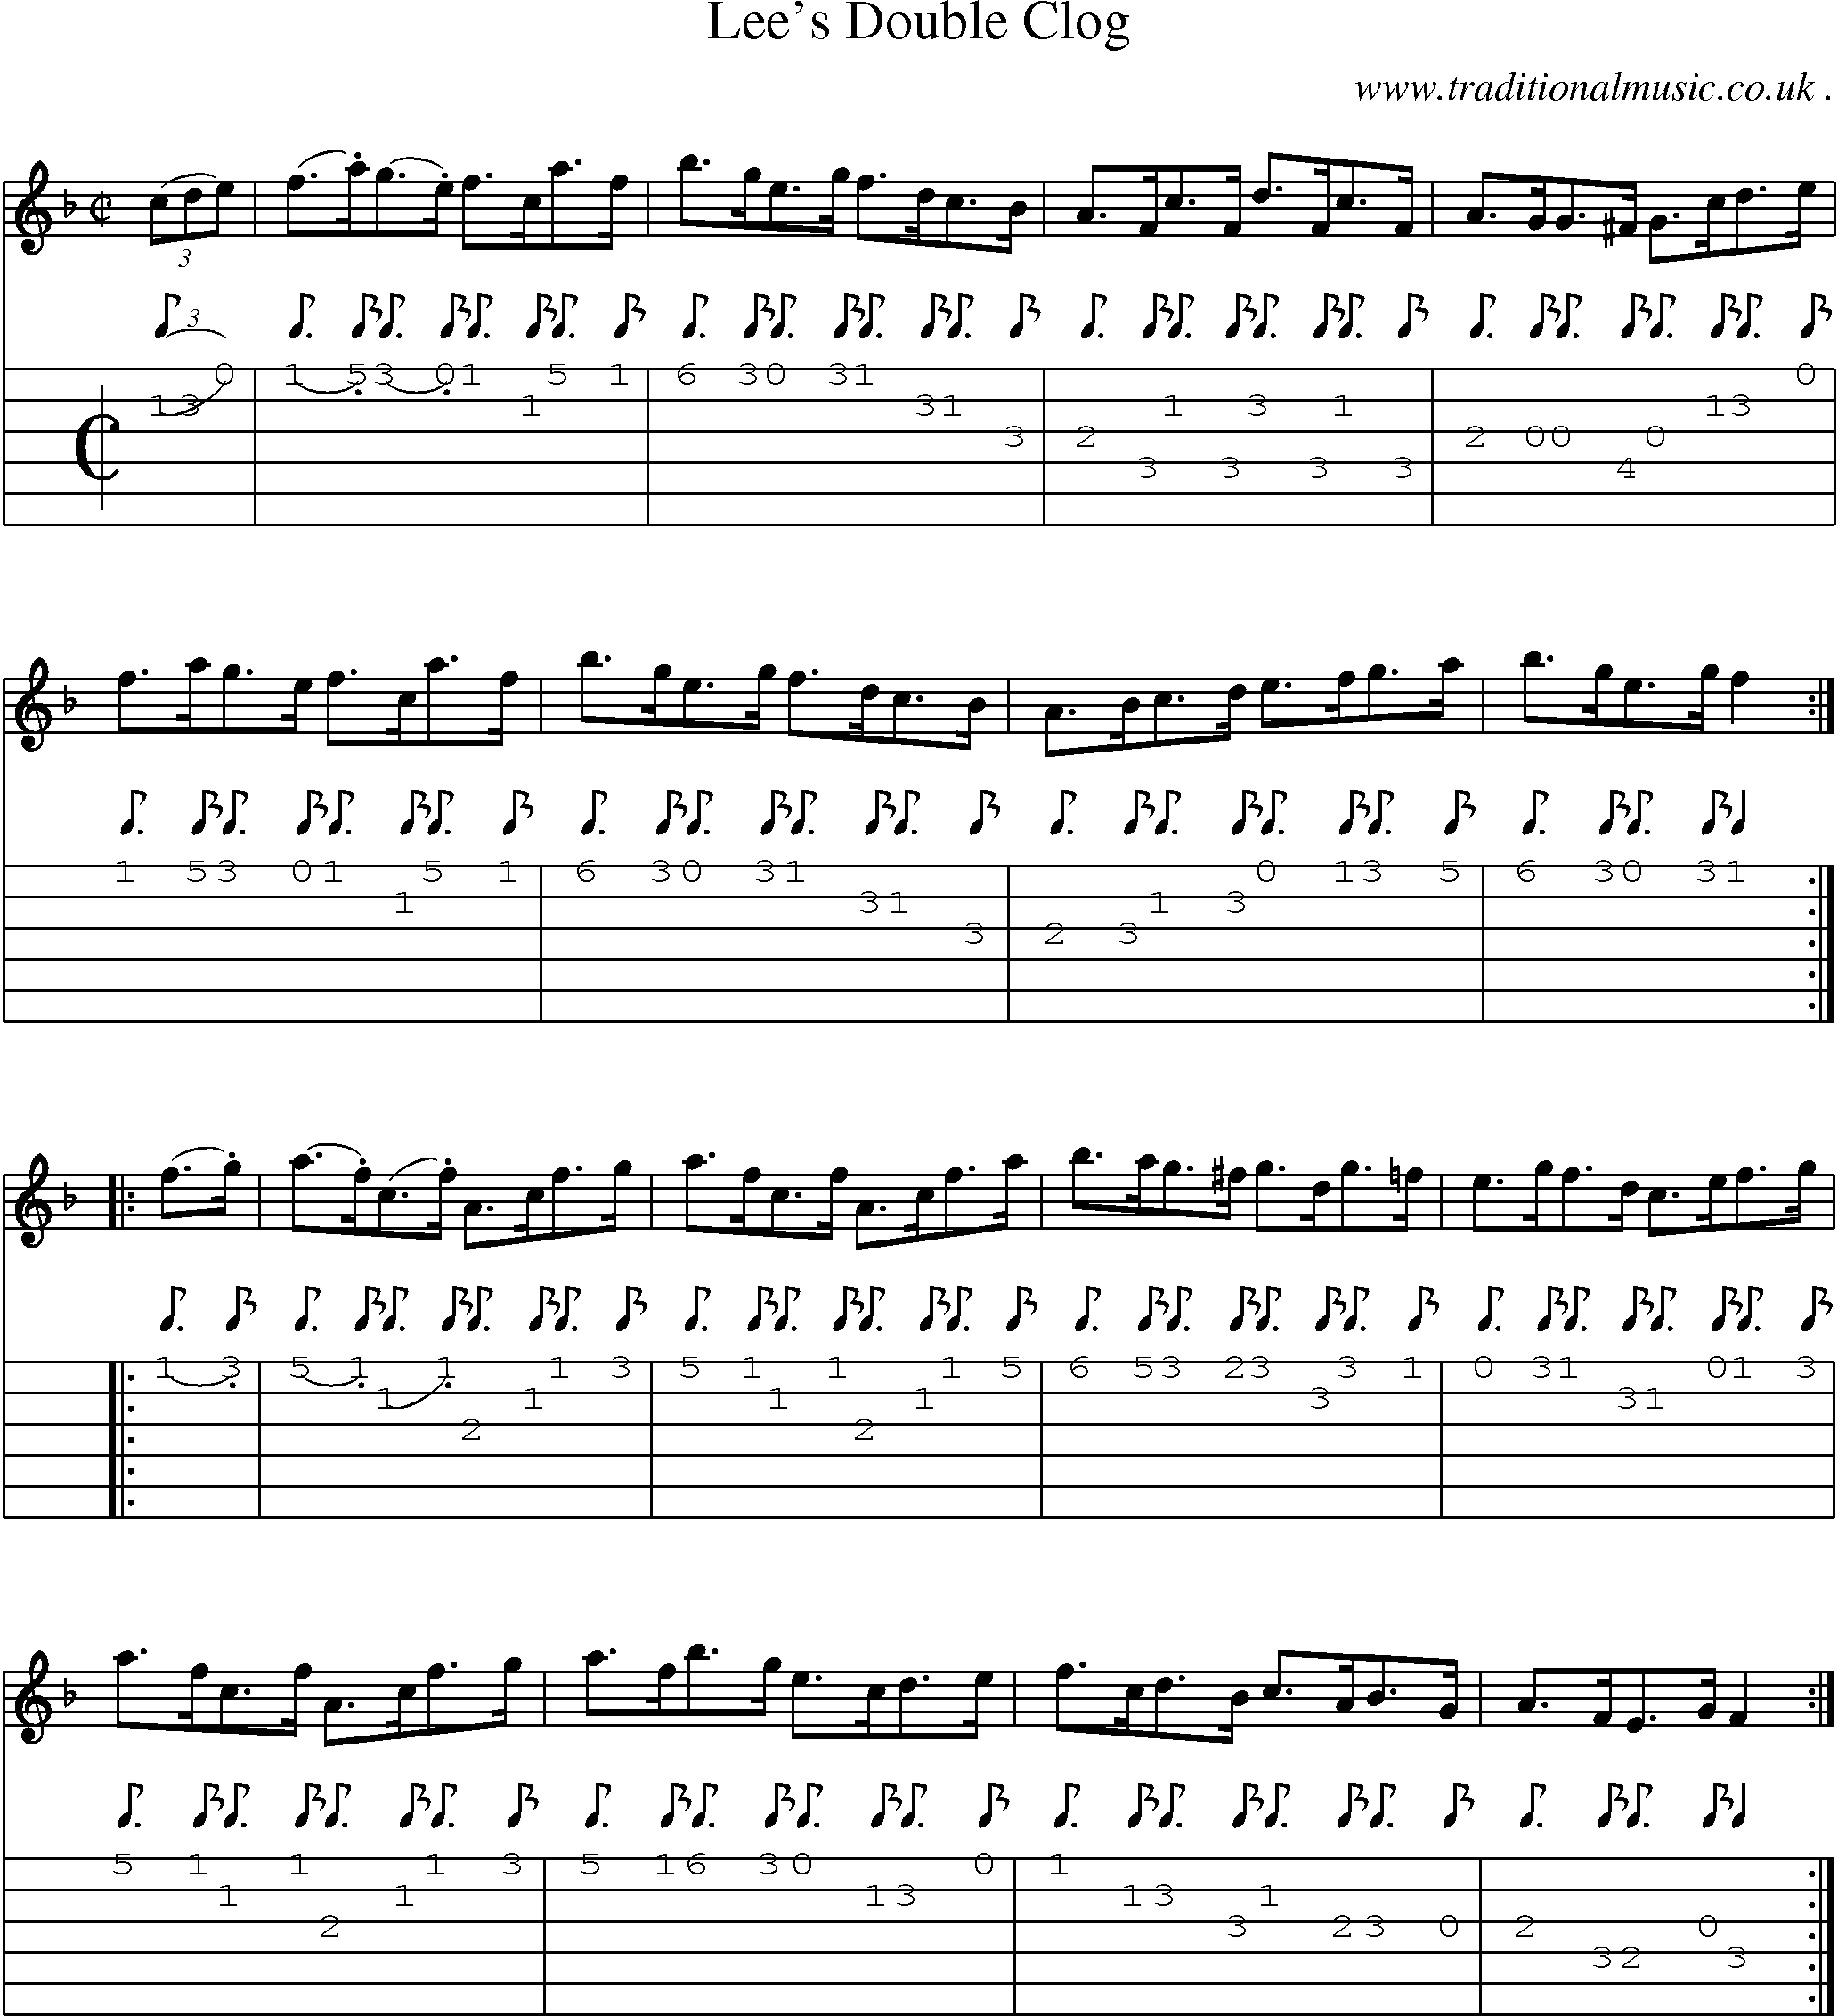 Sheet-Music and Guitar Tabs for Lees Double Clog